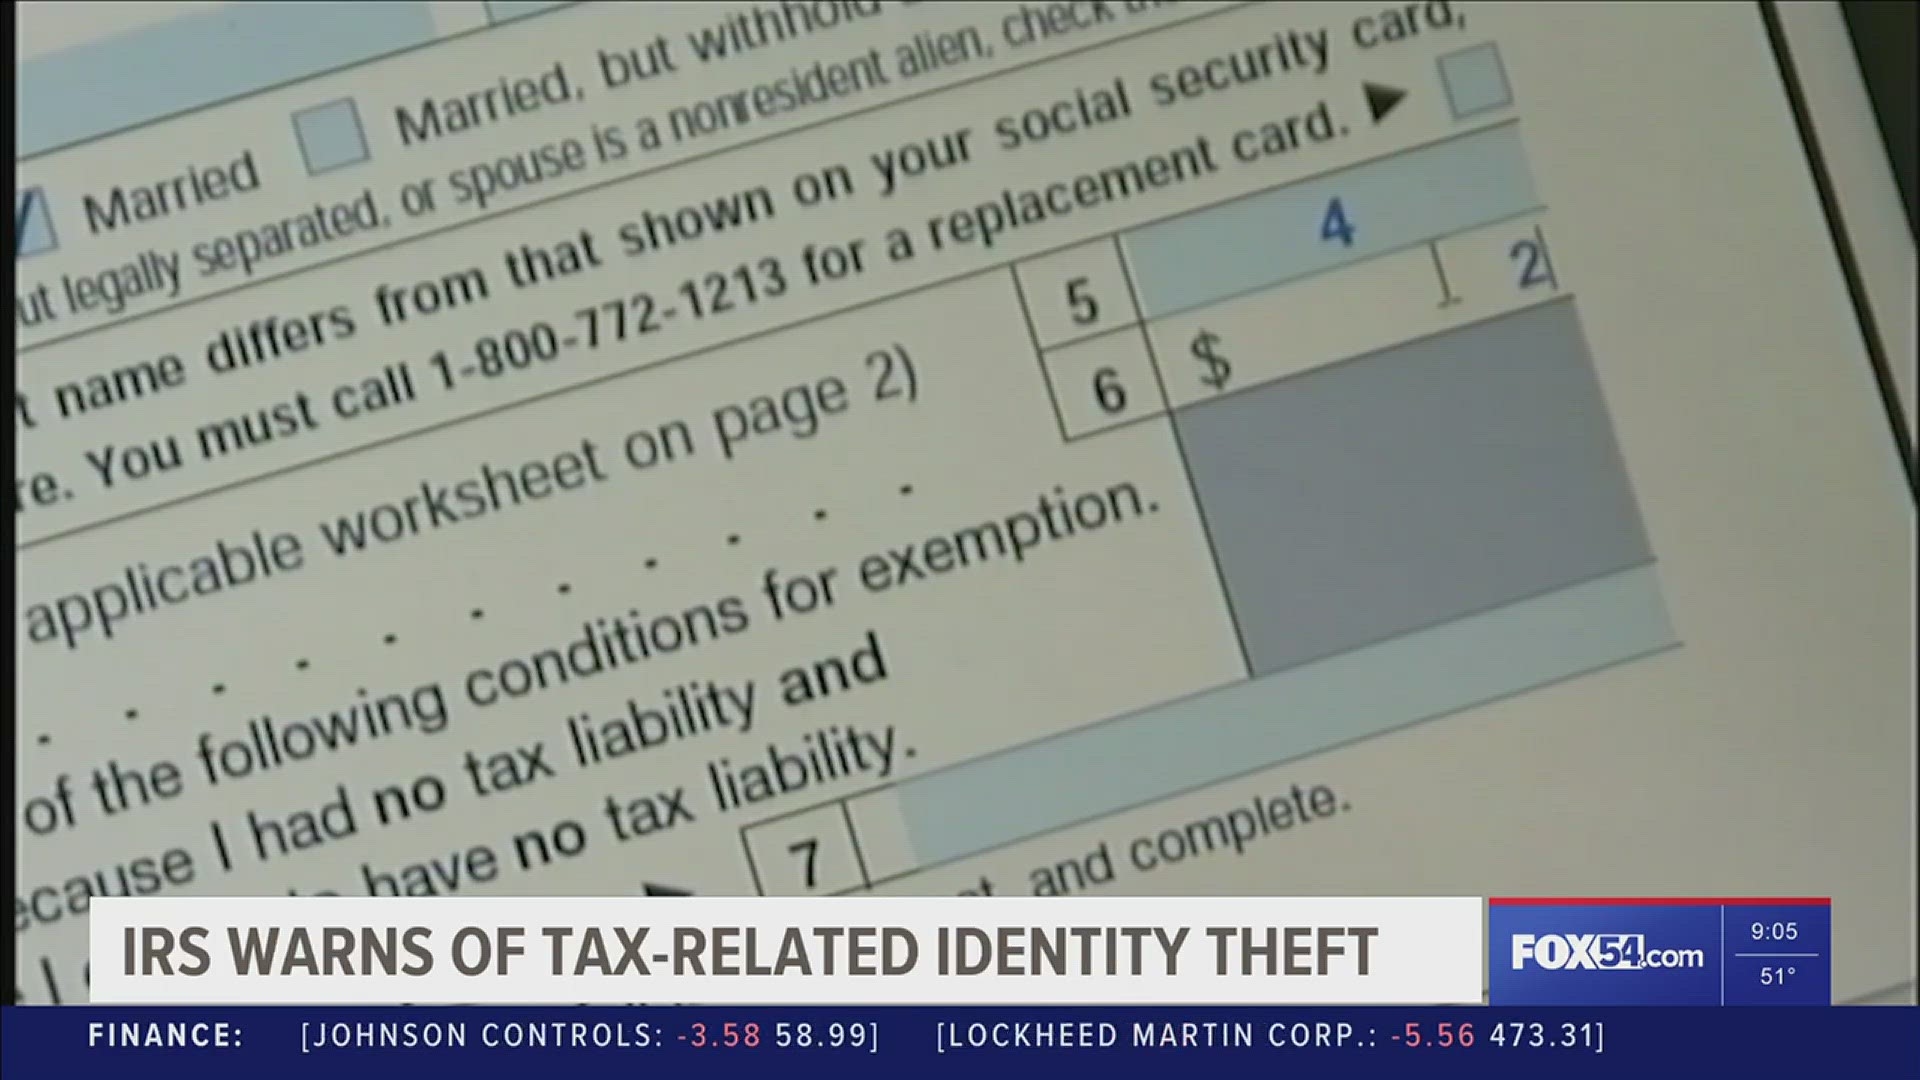 Tax-related identity theft occurs when someone uses your stolen personal information.